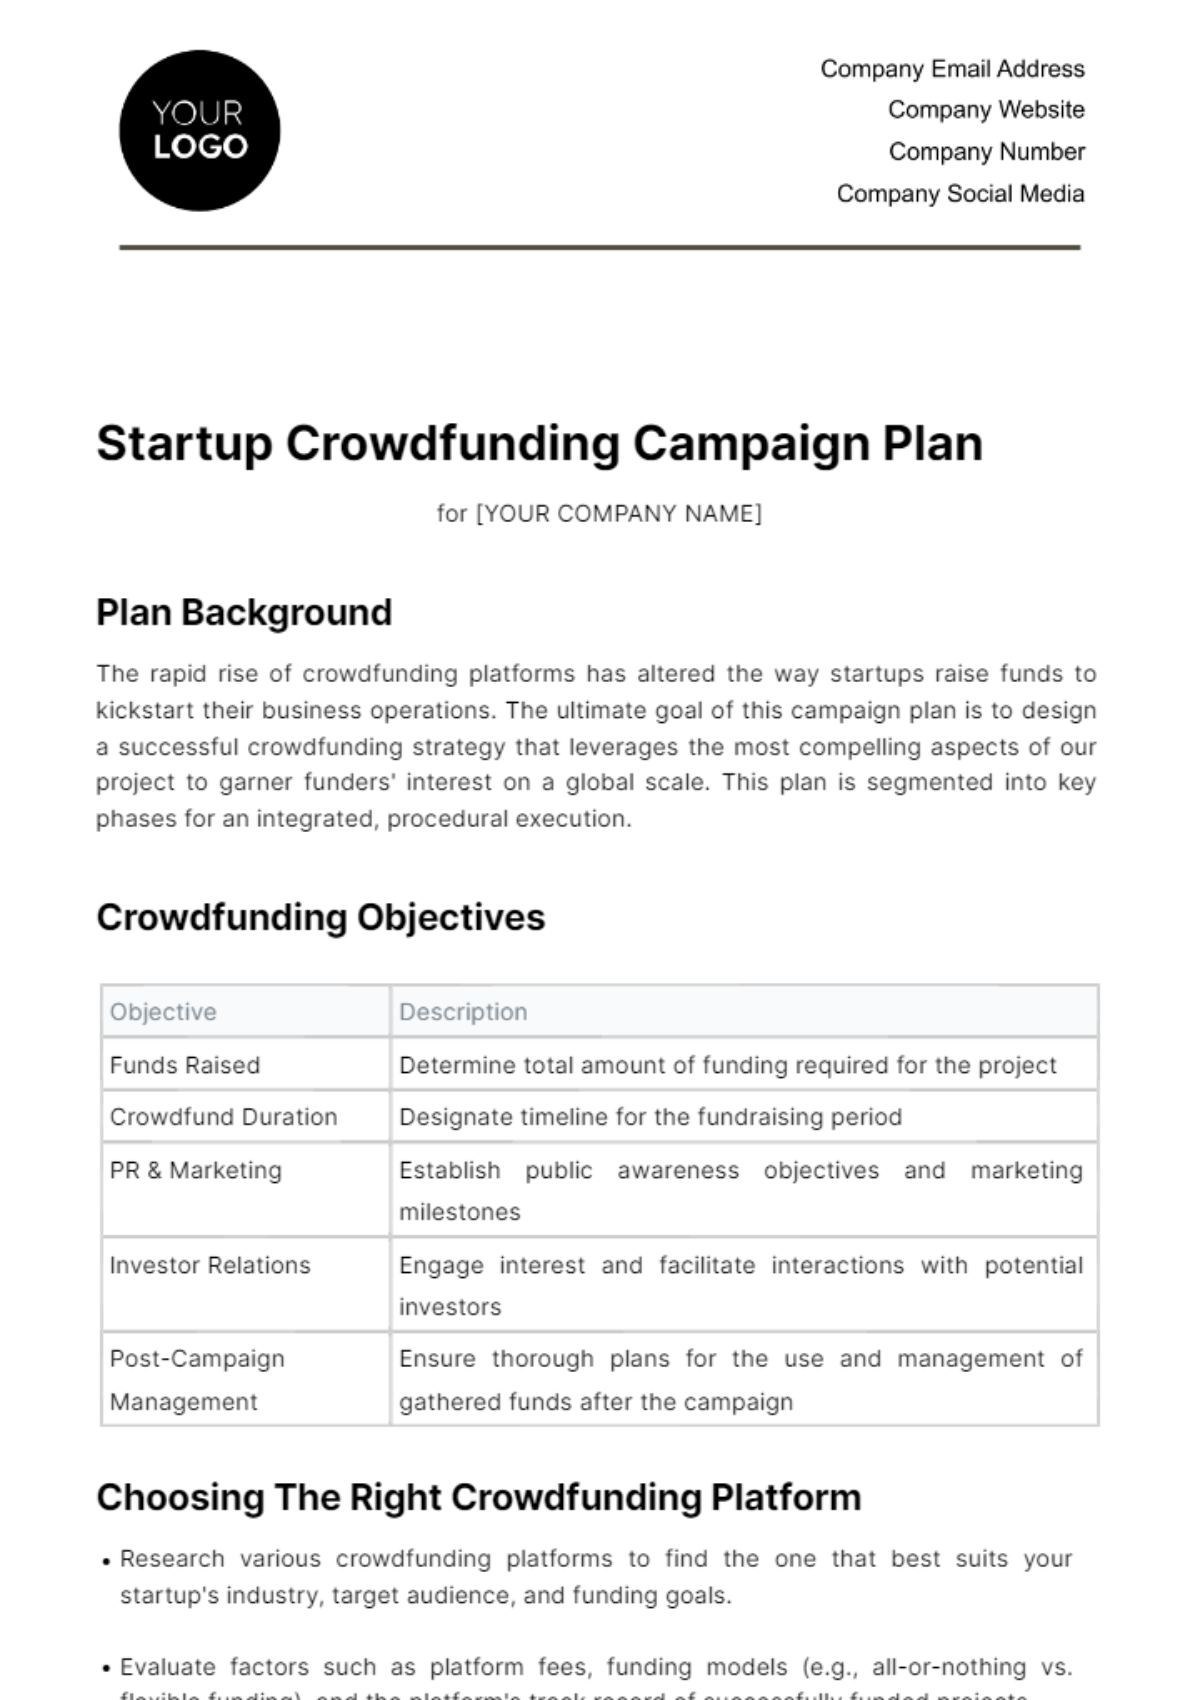 Free Startup Crowdfunding Campaign Plan Template